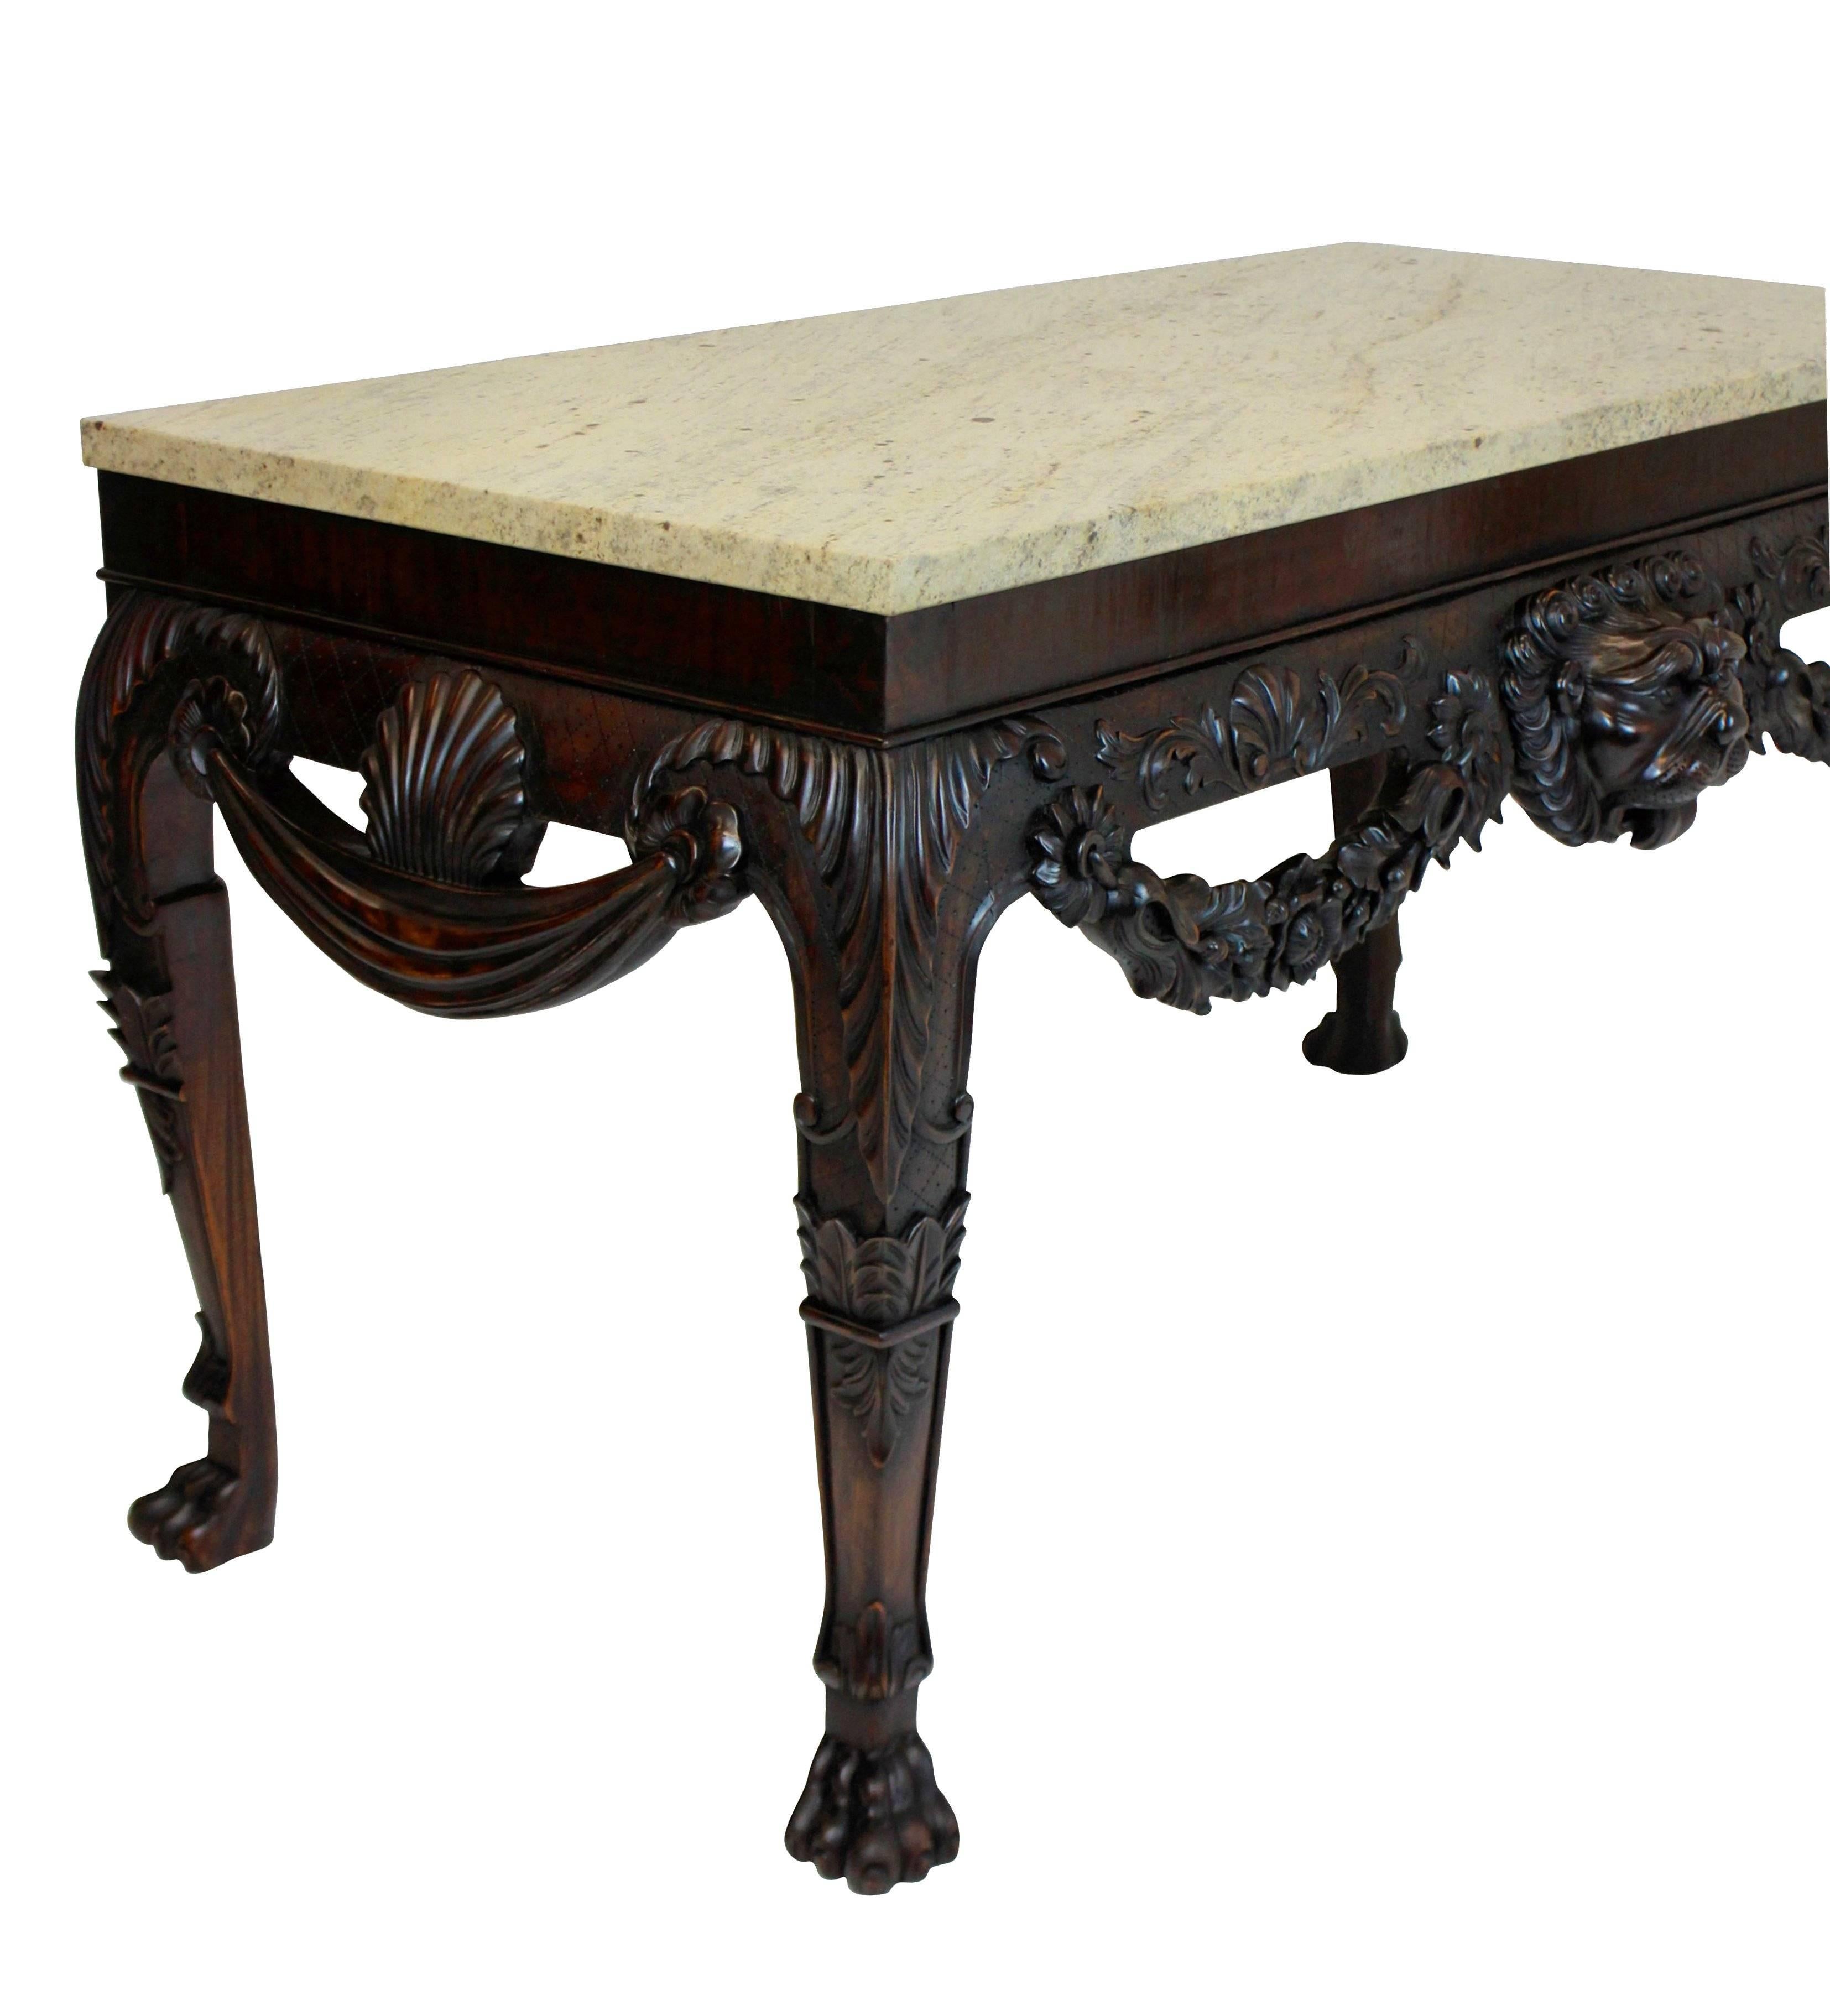 A pair of large English Country House carved mahogany console tables in the manner of William Kent of great scale and presence. The carving is well executed, with lion masks, shells and swags. The tops are honed variegated stone colored marble.

  